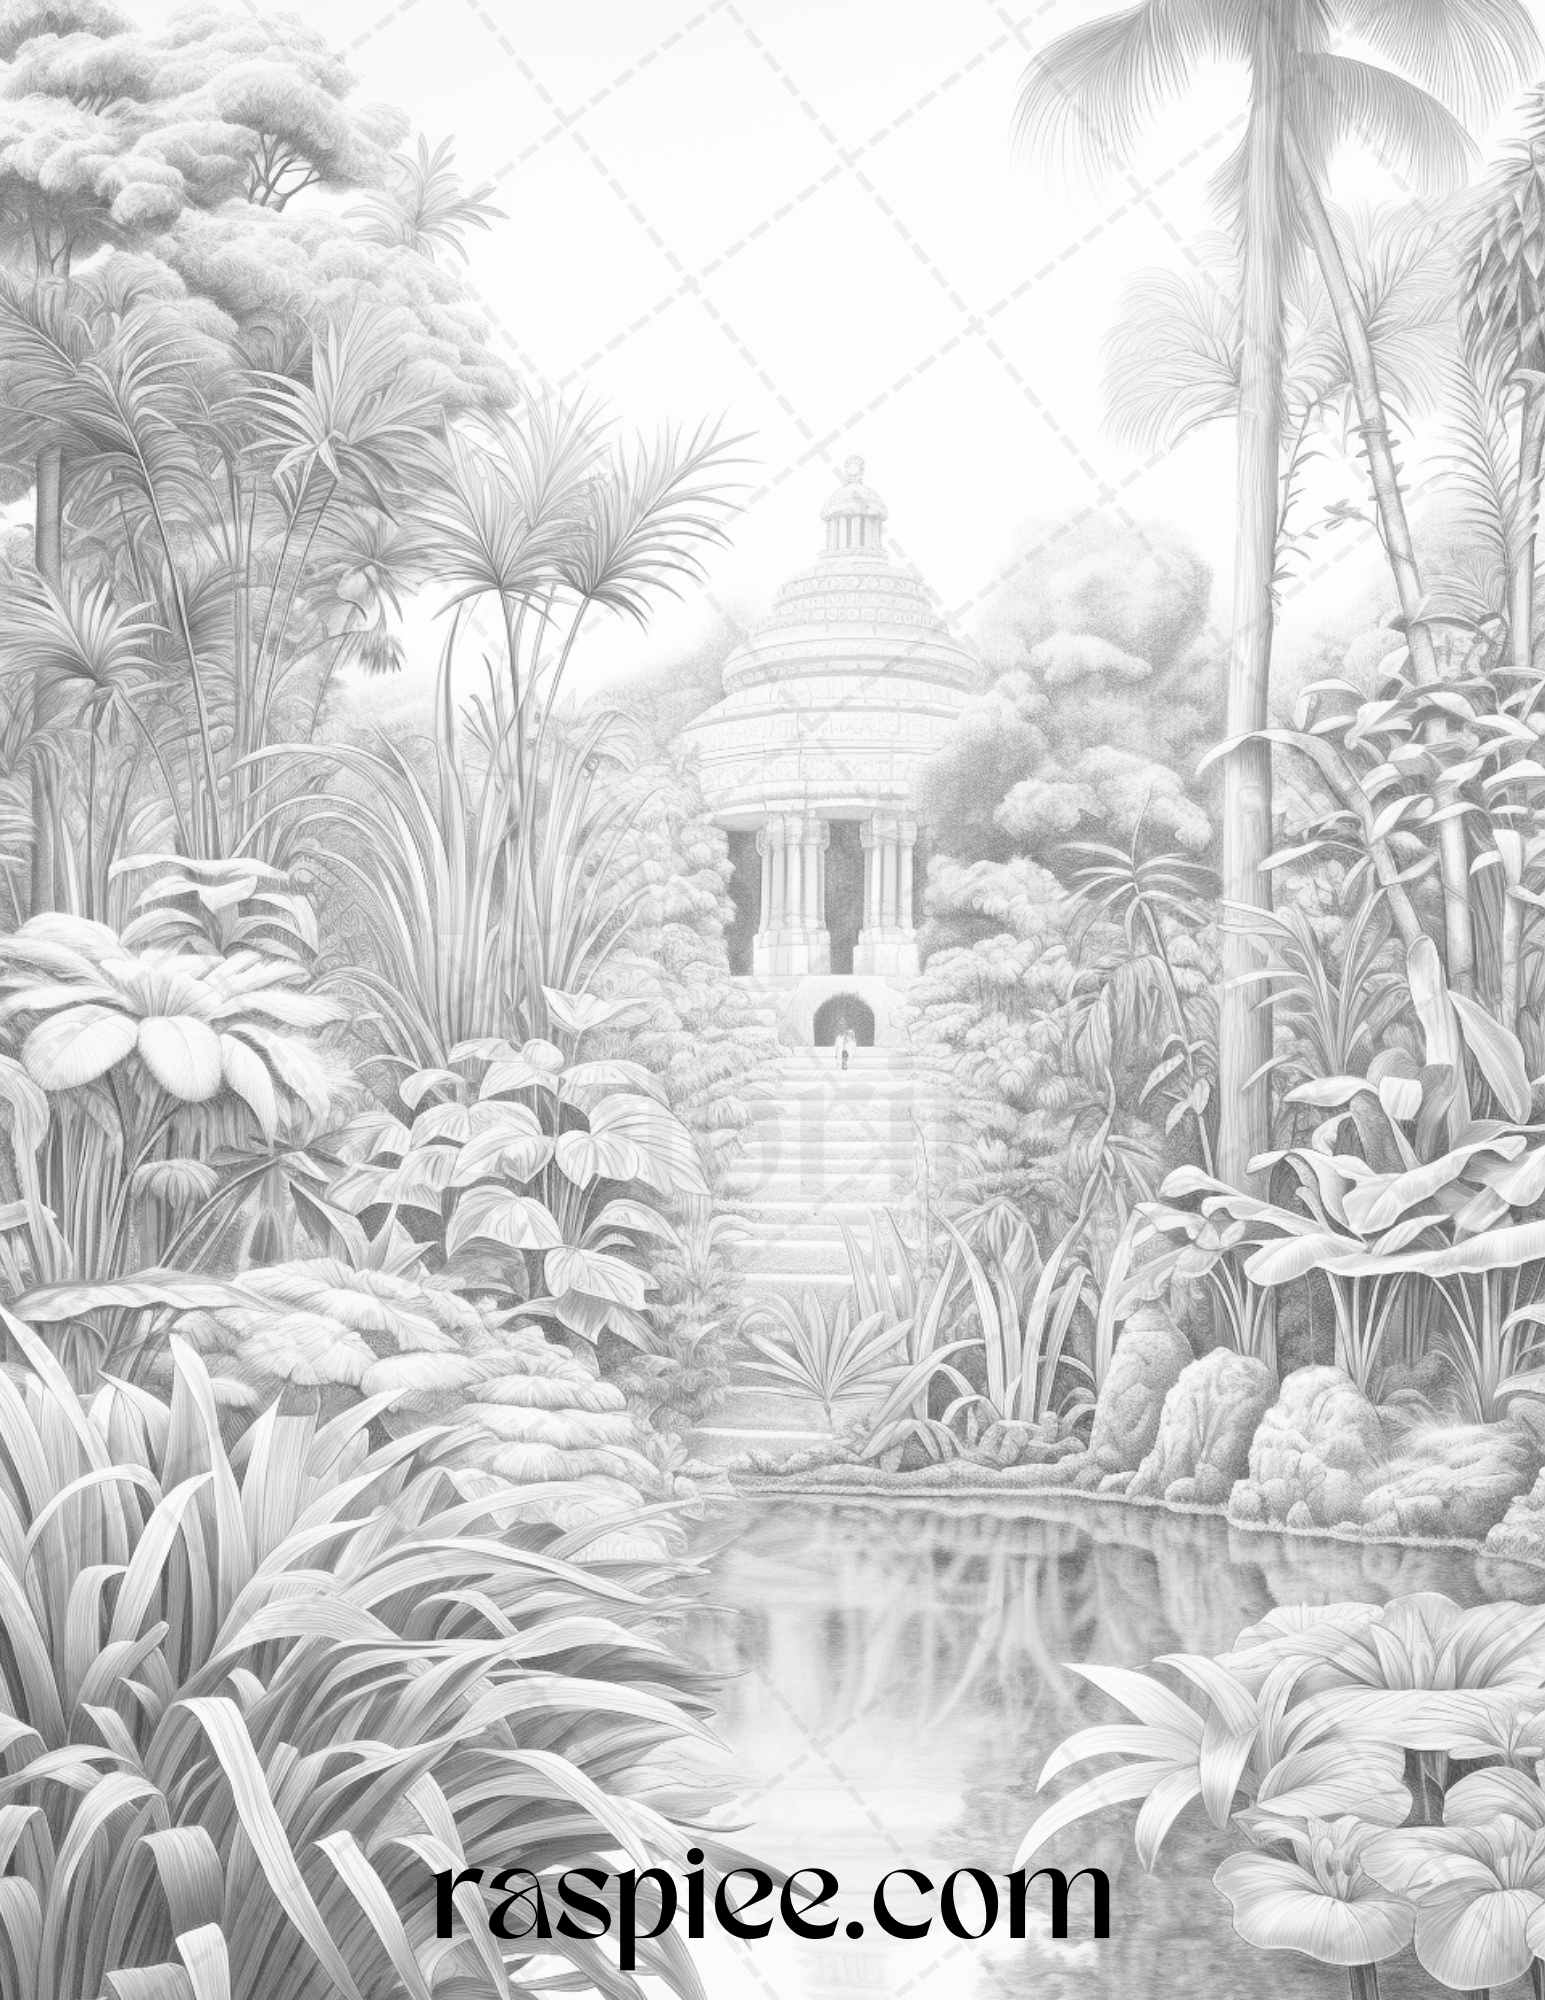 52 Tropical Oasis Grayscale Coloring Pages Printable for Adults, PDF File Instant Download - Raspiee Coloring